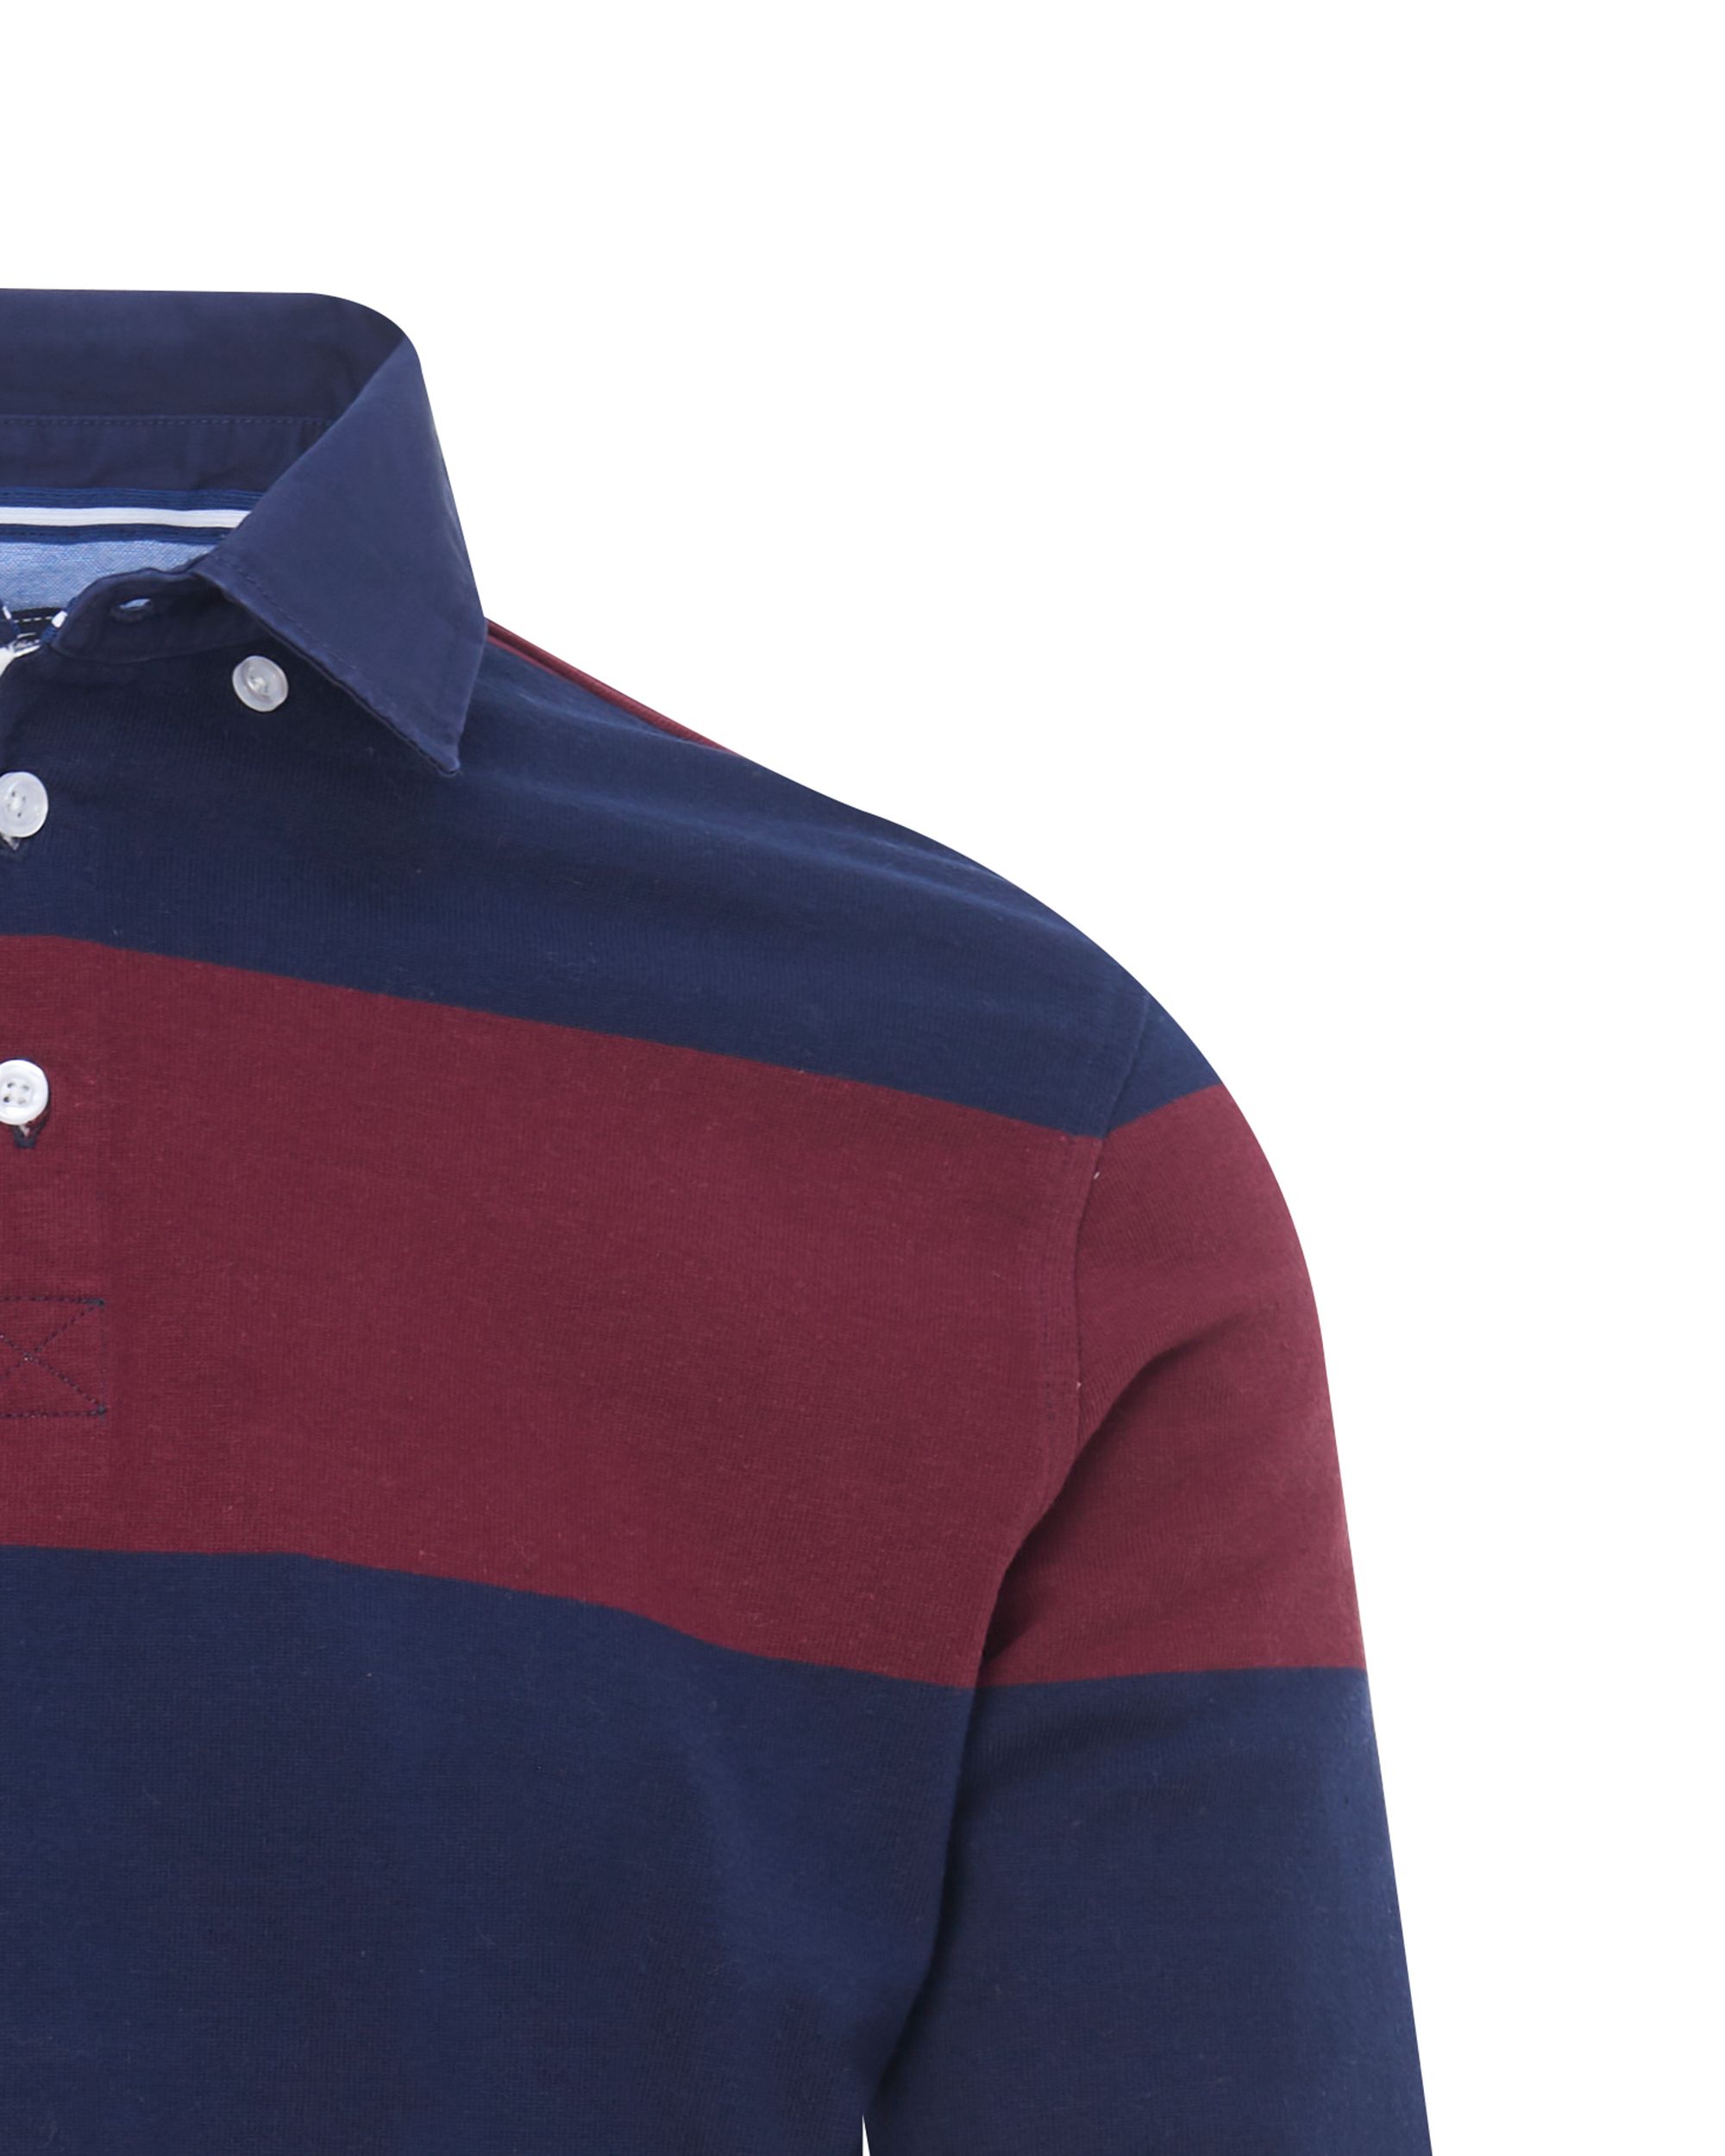 Campbell Classic Polo LM Bordeaux streep 084529-003-L